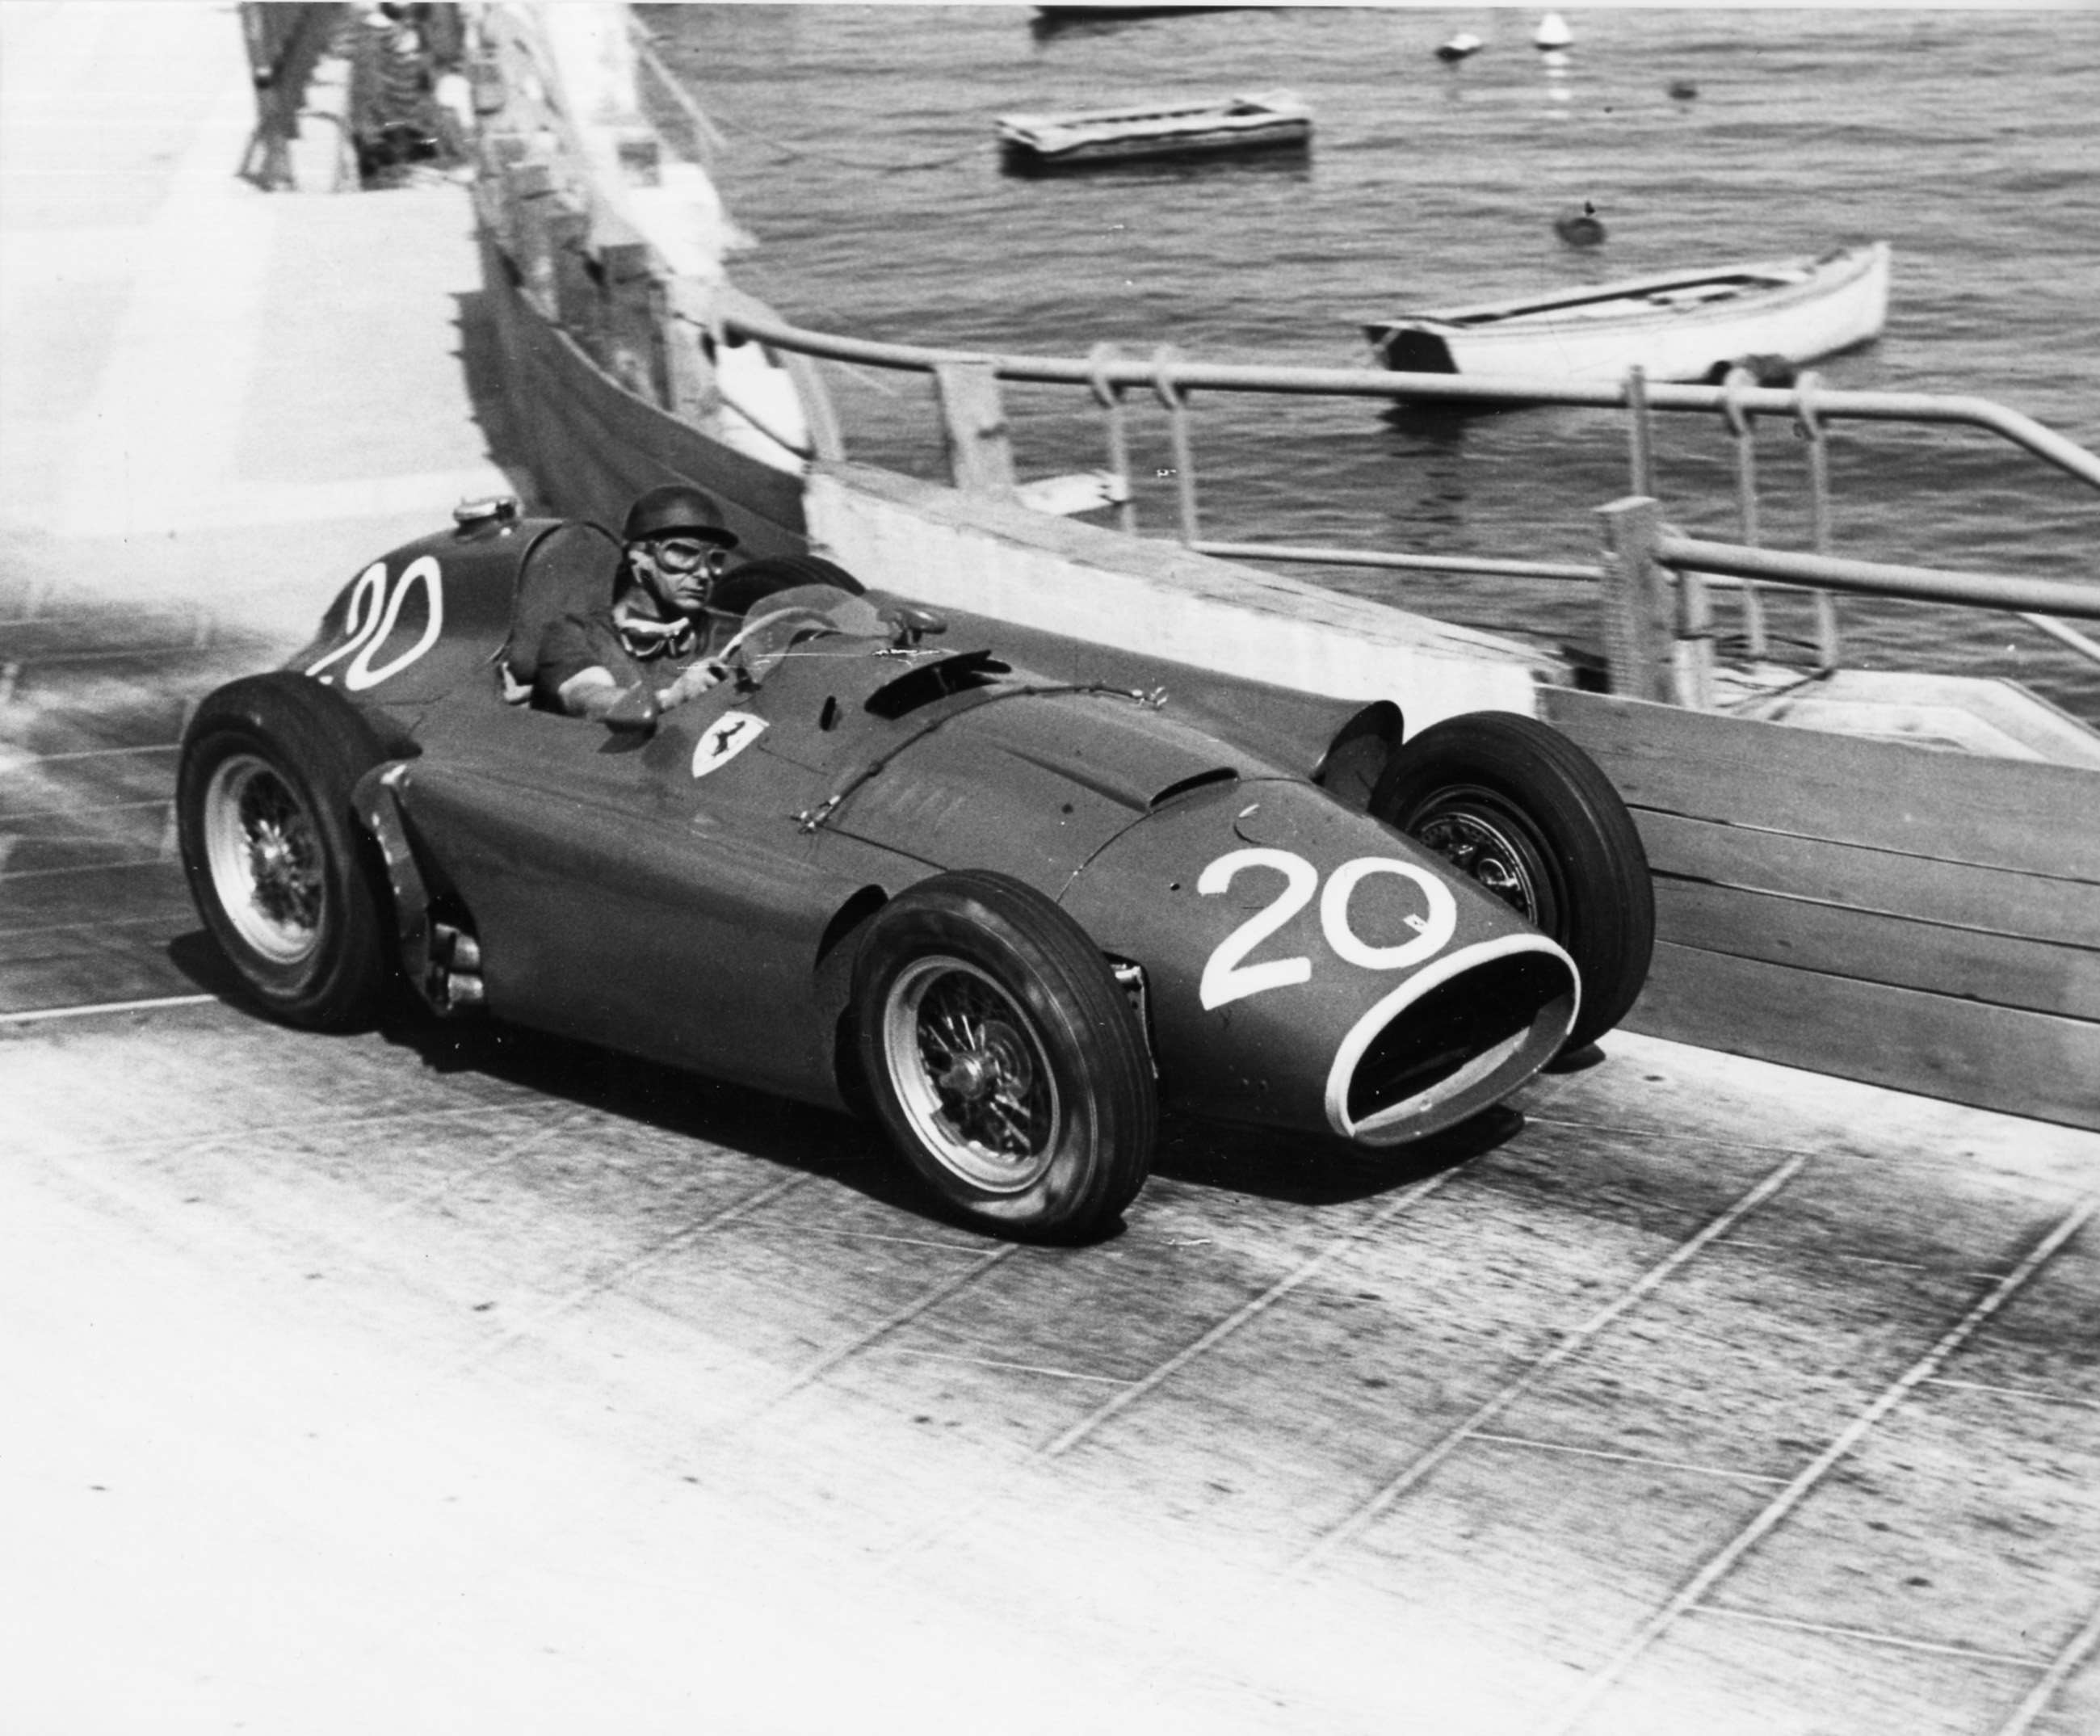 In 1956 Fangio had a troubled early-season with the Lancia-Ferraris – as here at Monaco - before coming good later in the year and - with team-mate Peter Collins’s sporting assistance - clinching his fourth Championship title in that year’s Italian GP